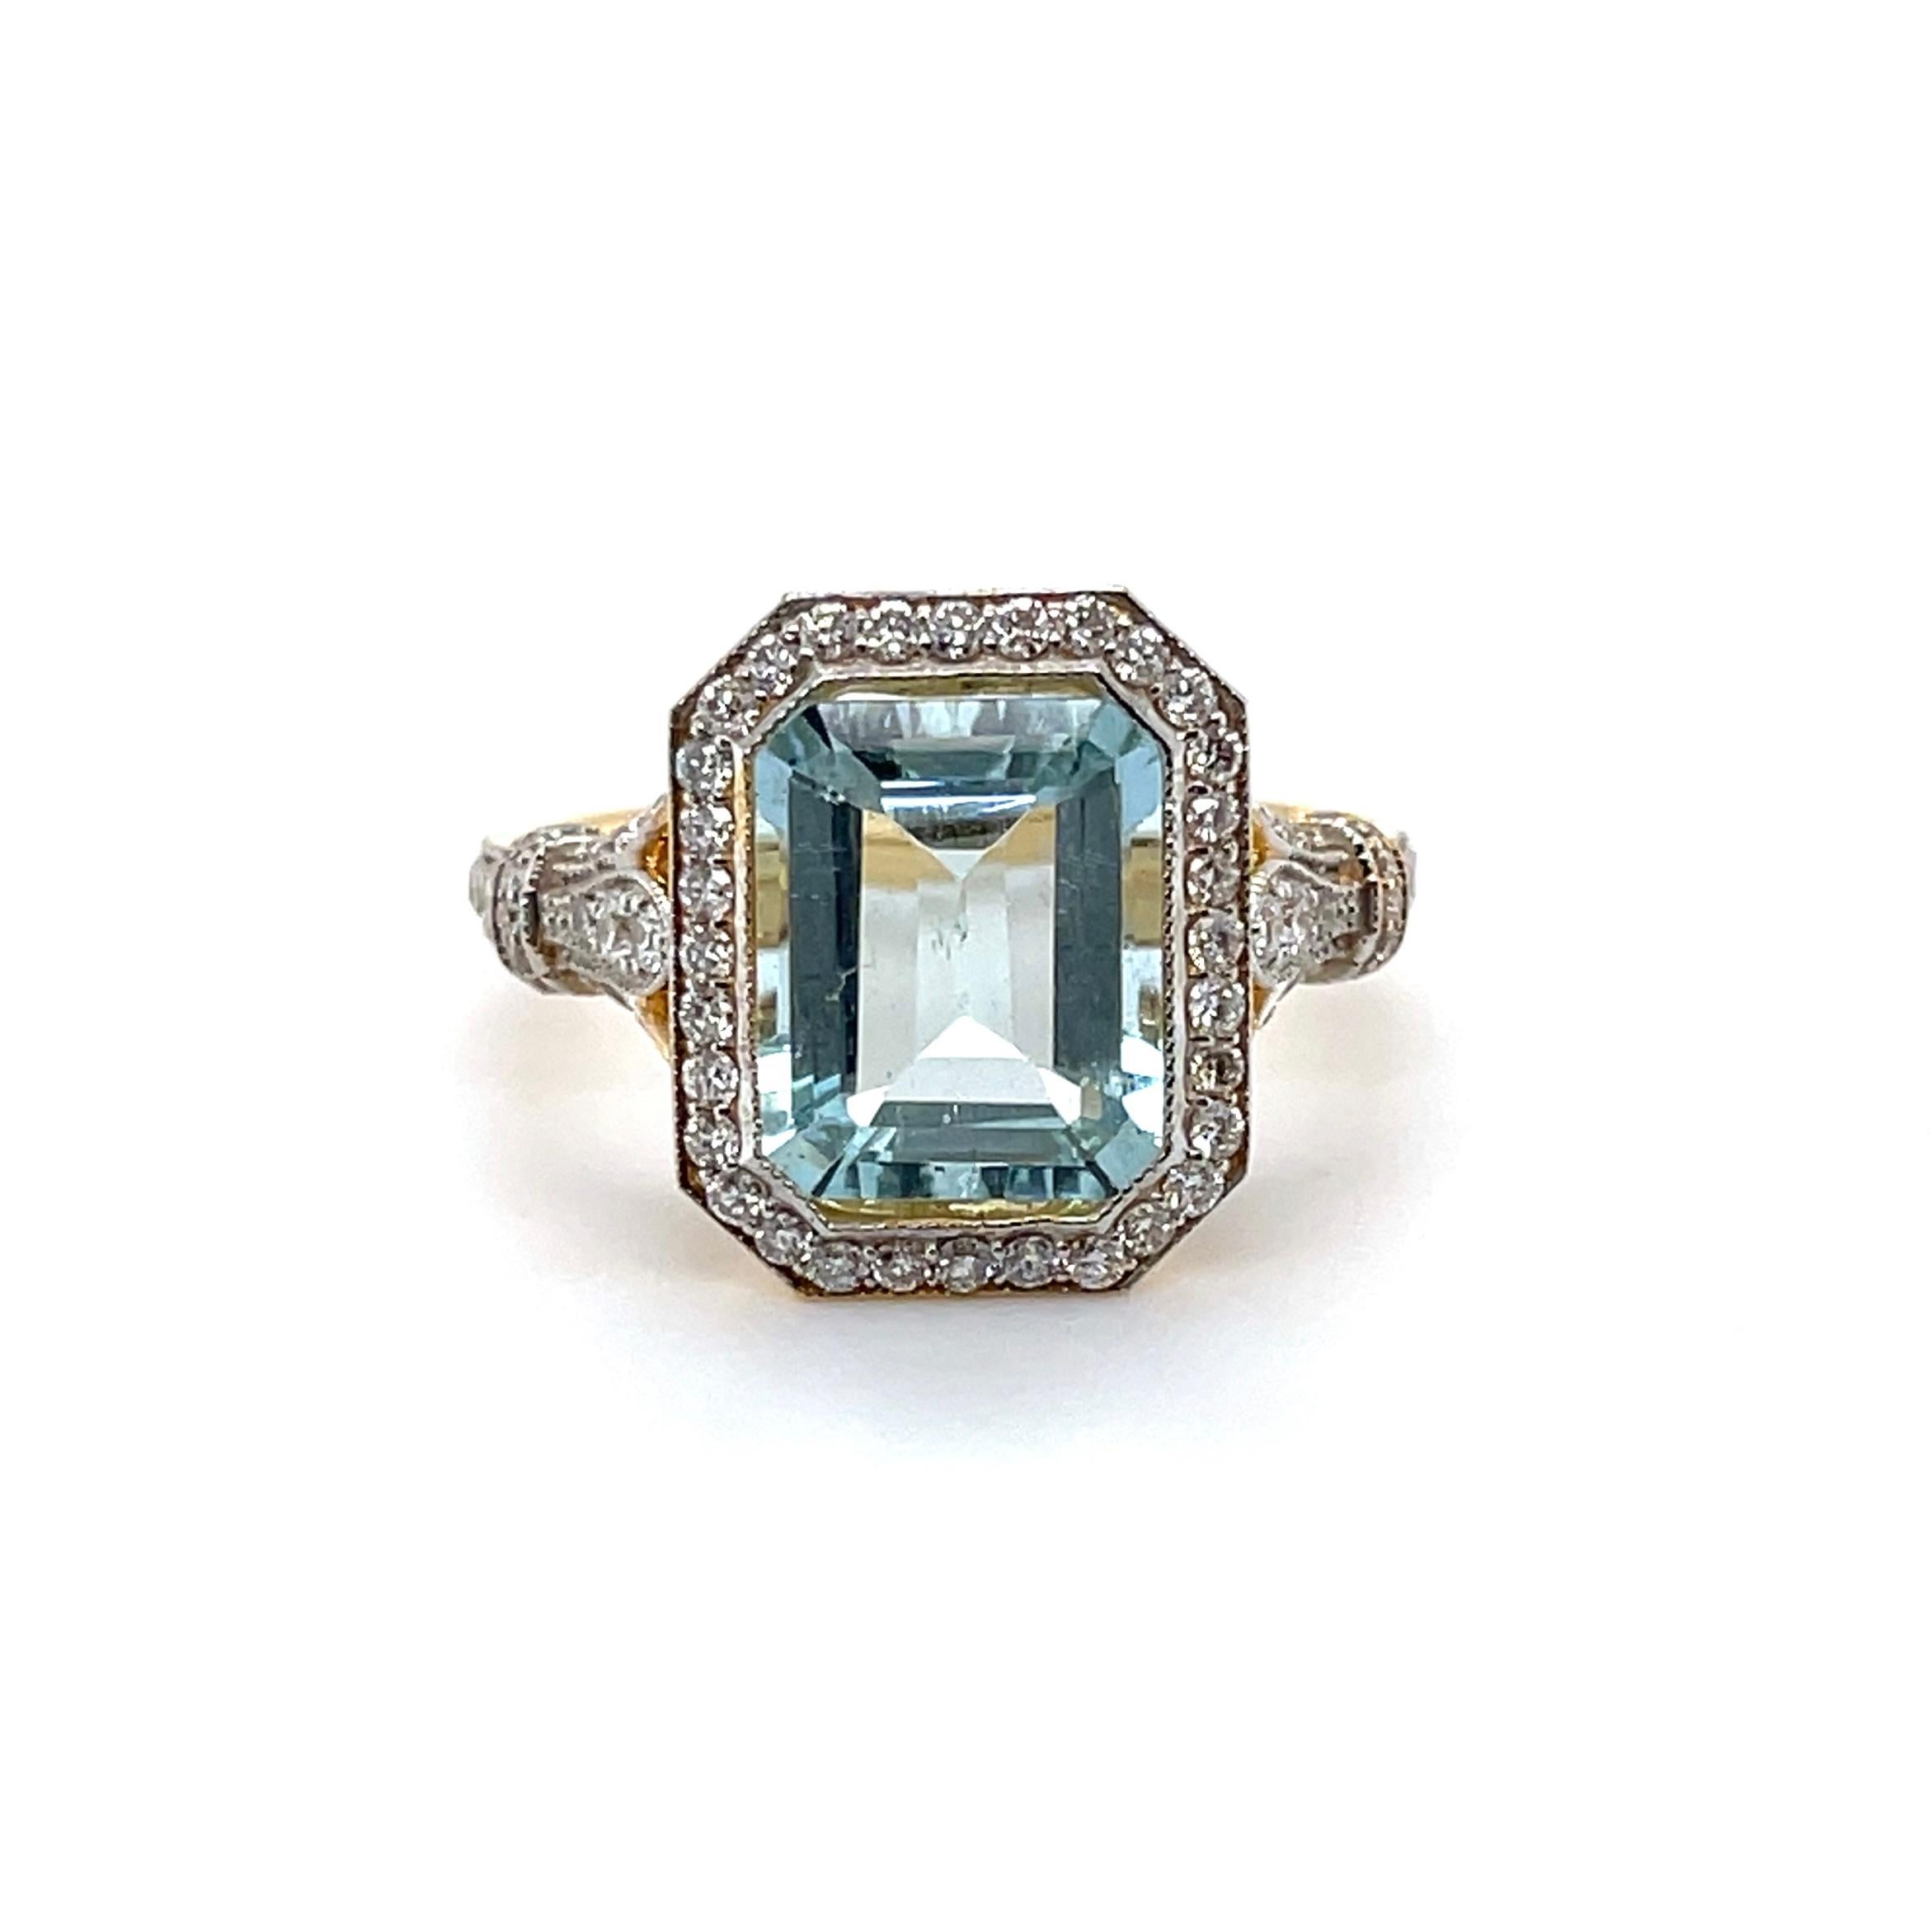 For Sale:  18ct Yellow Gold Ring with 3.45ct Aquamarine and Diamond